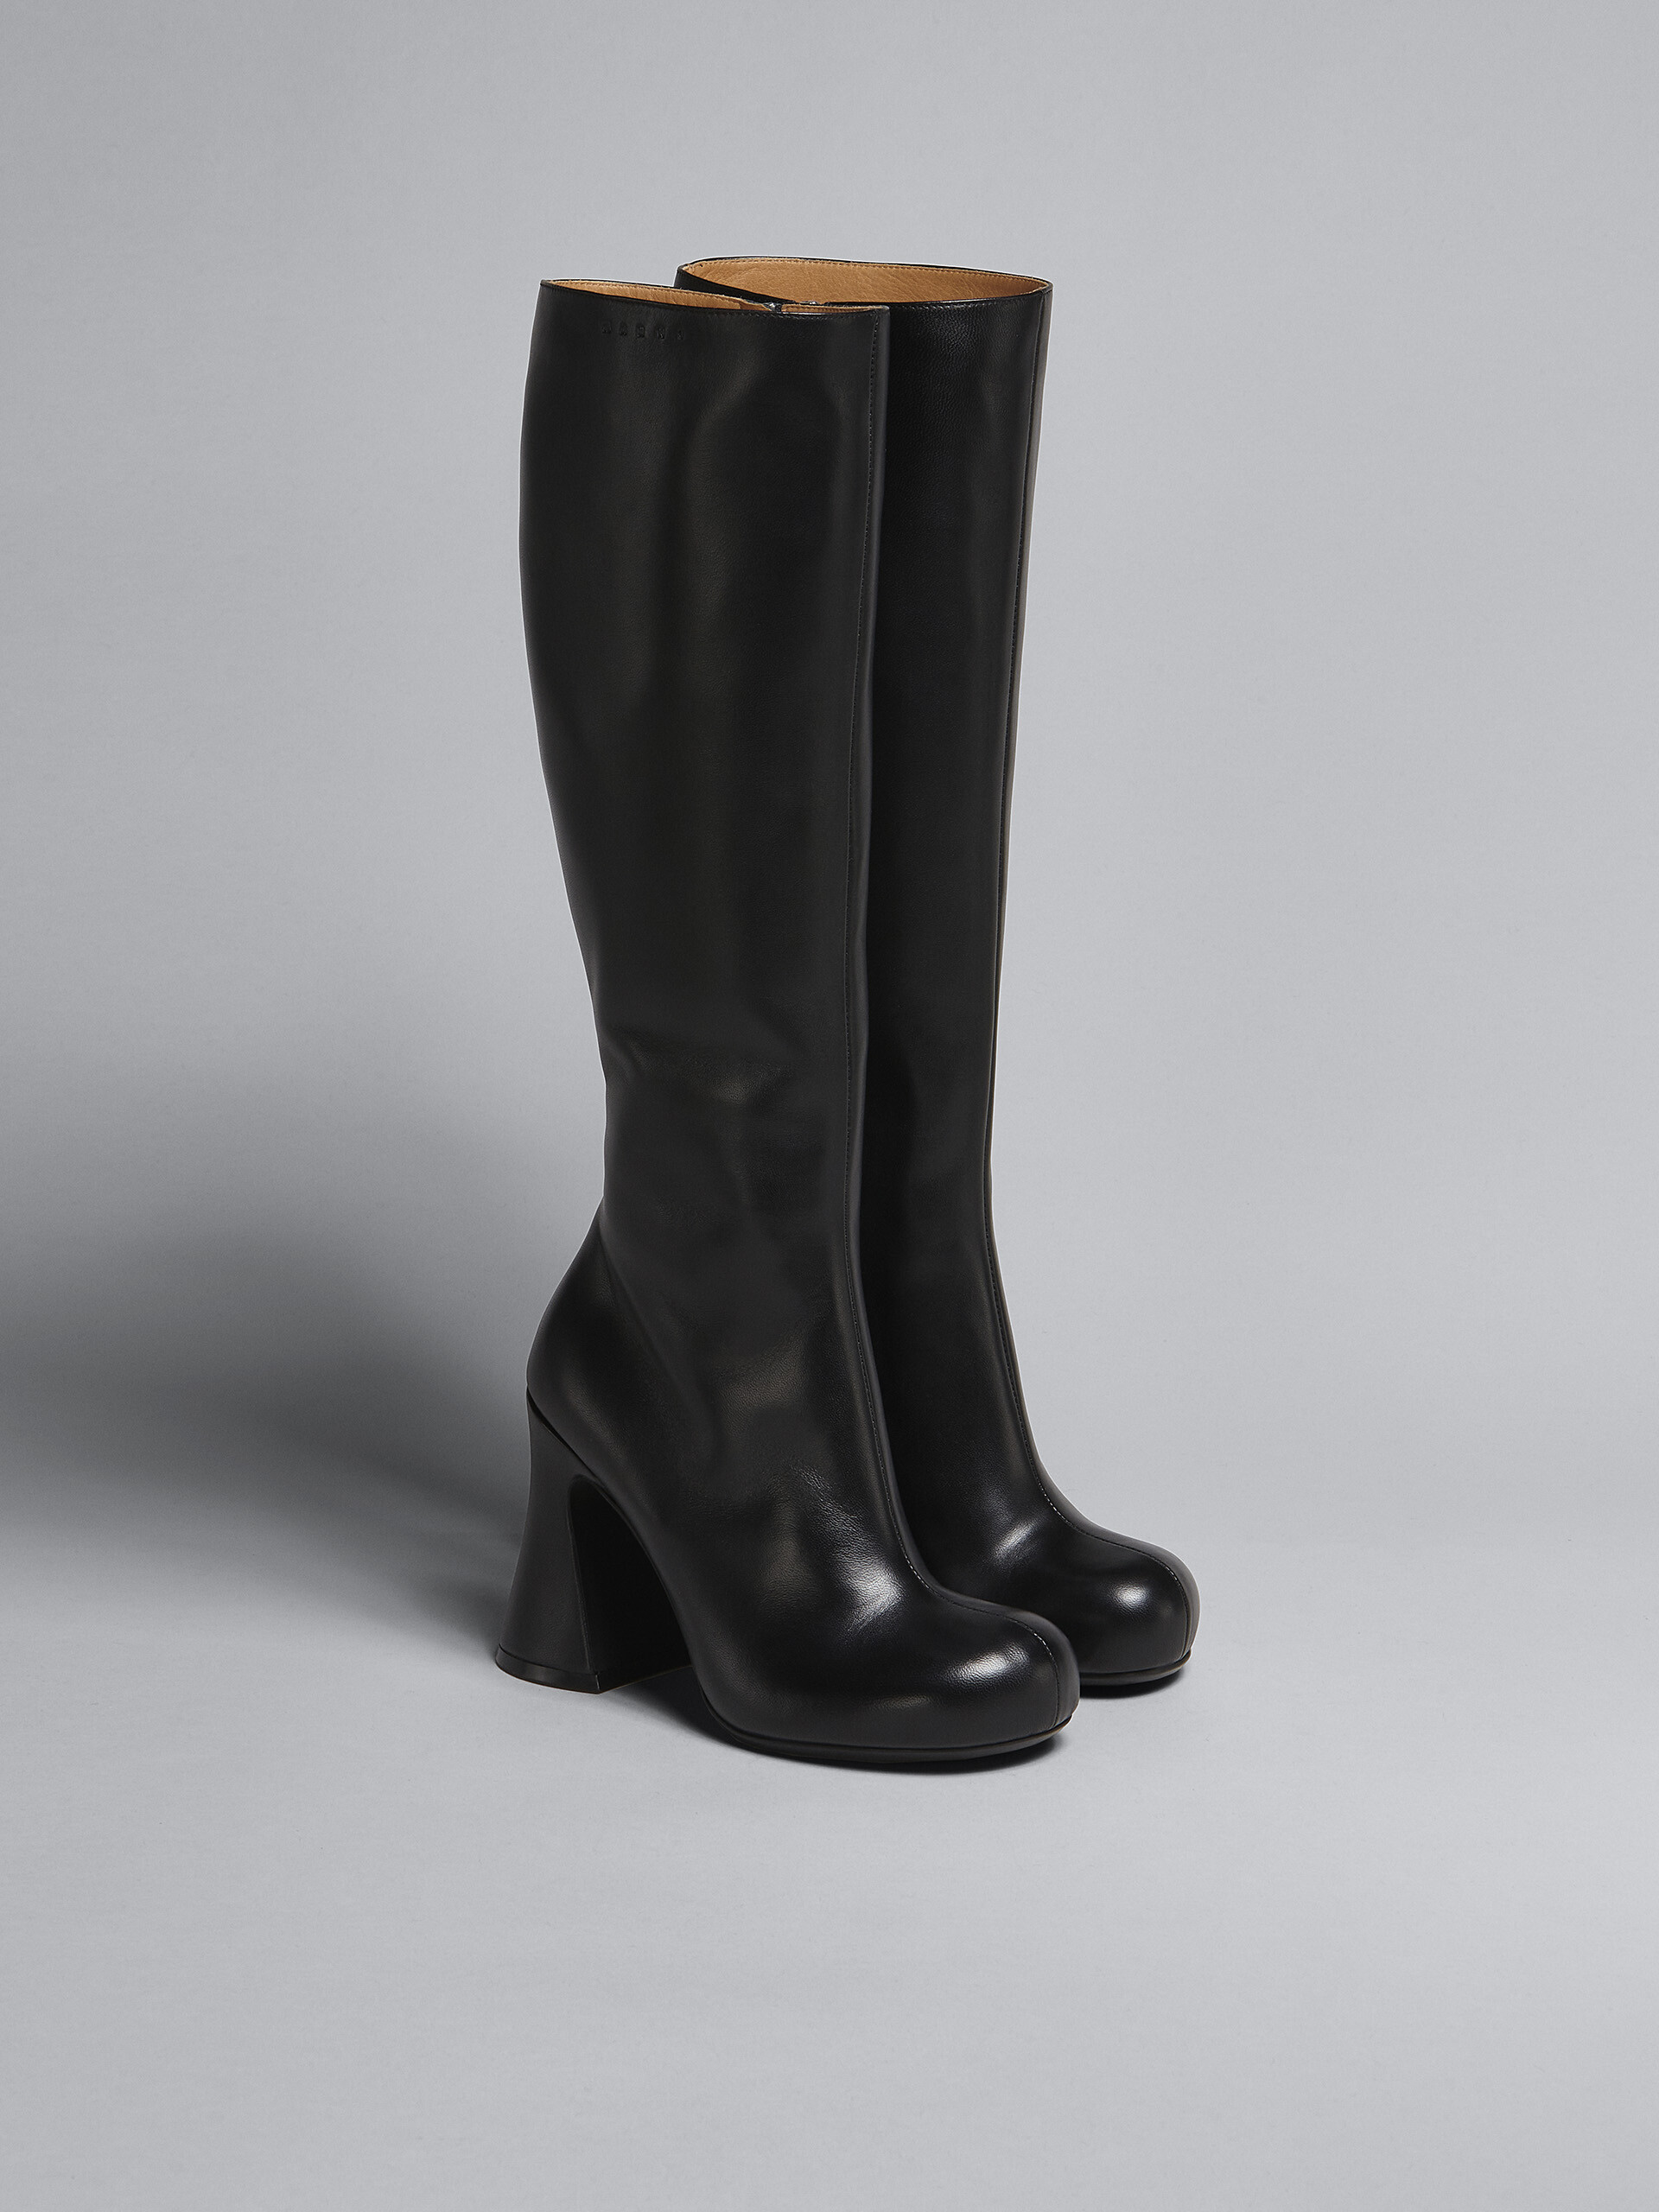 Black leather boot - Boots - Image 2